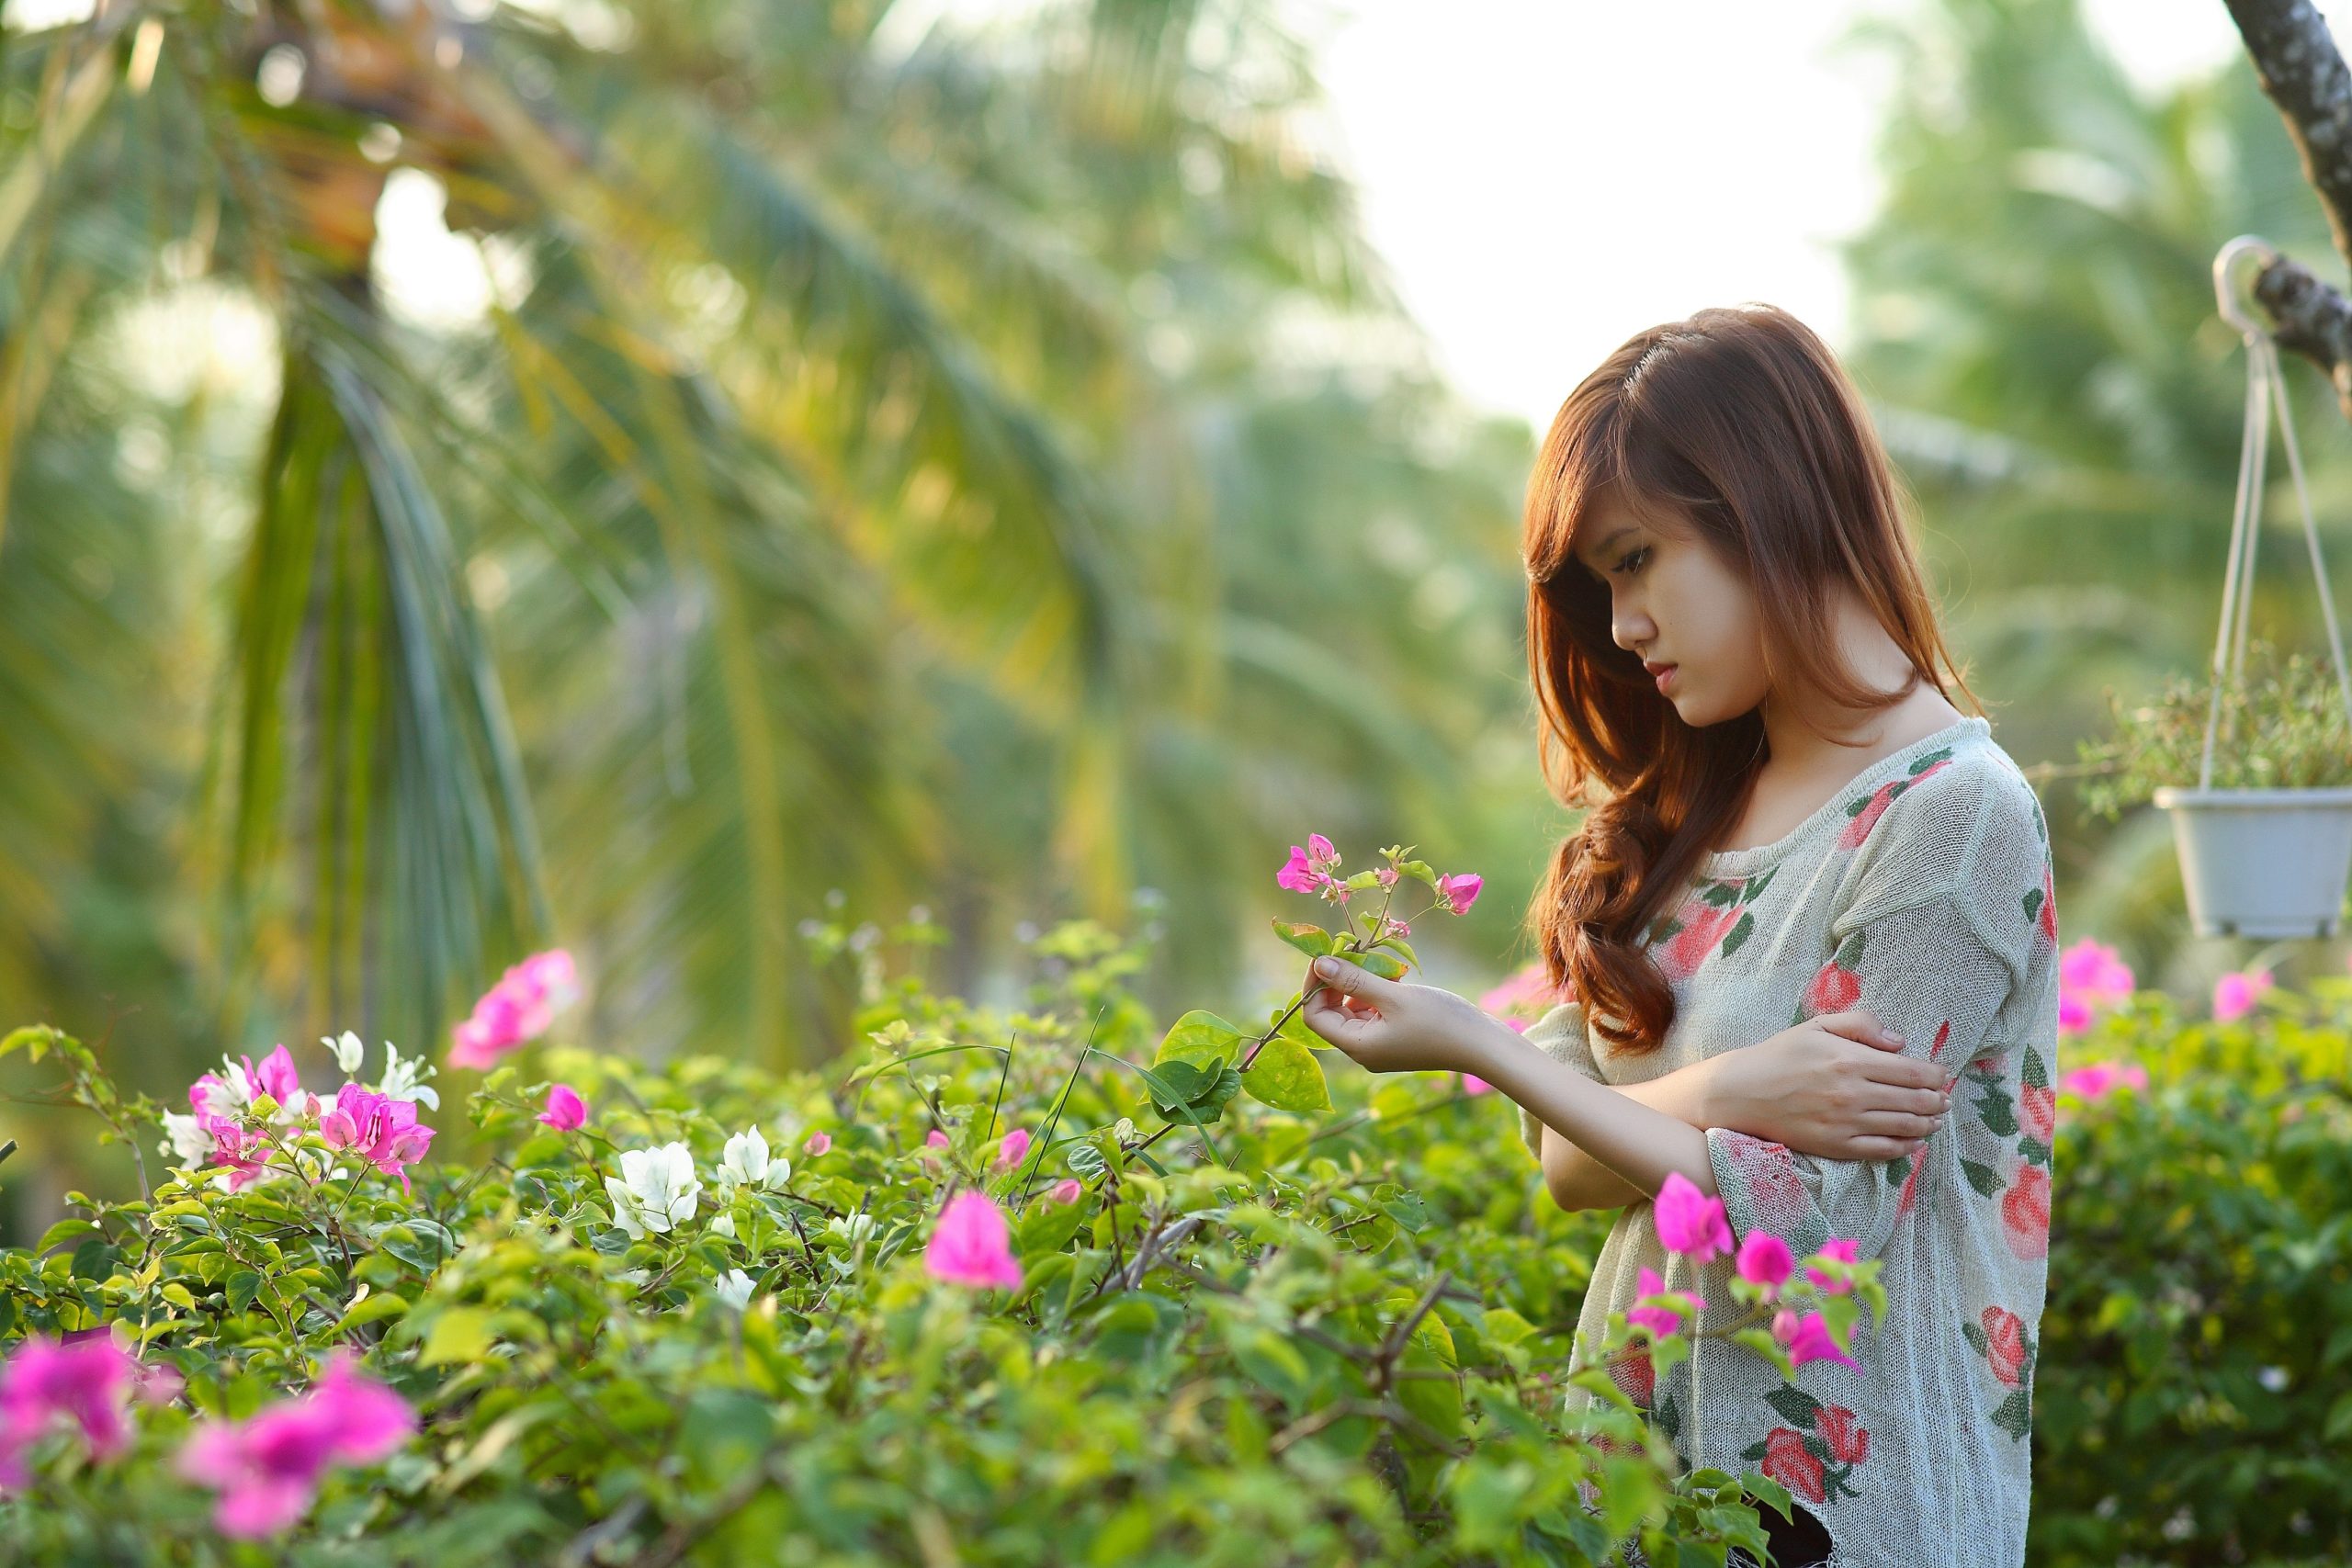 Woman looking sad looking at flowers in a garden